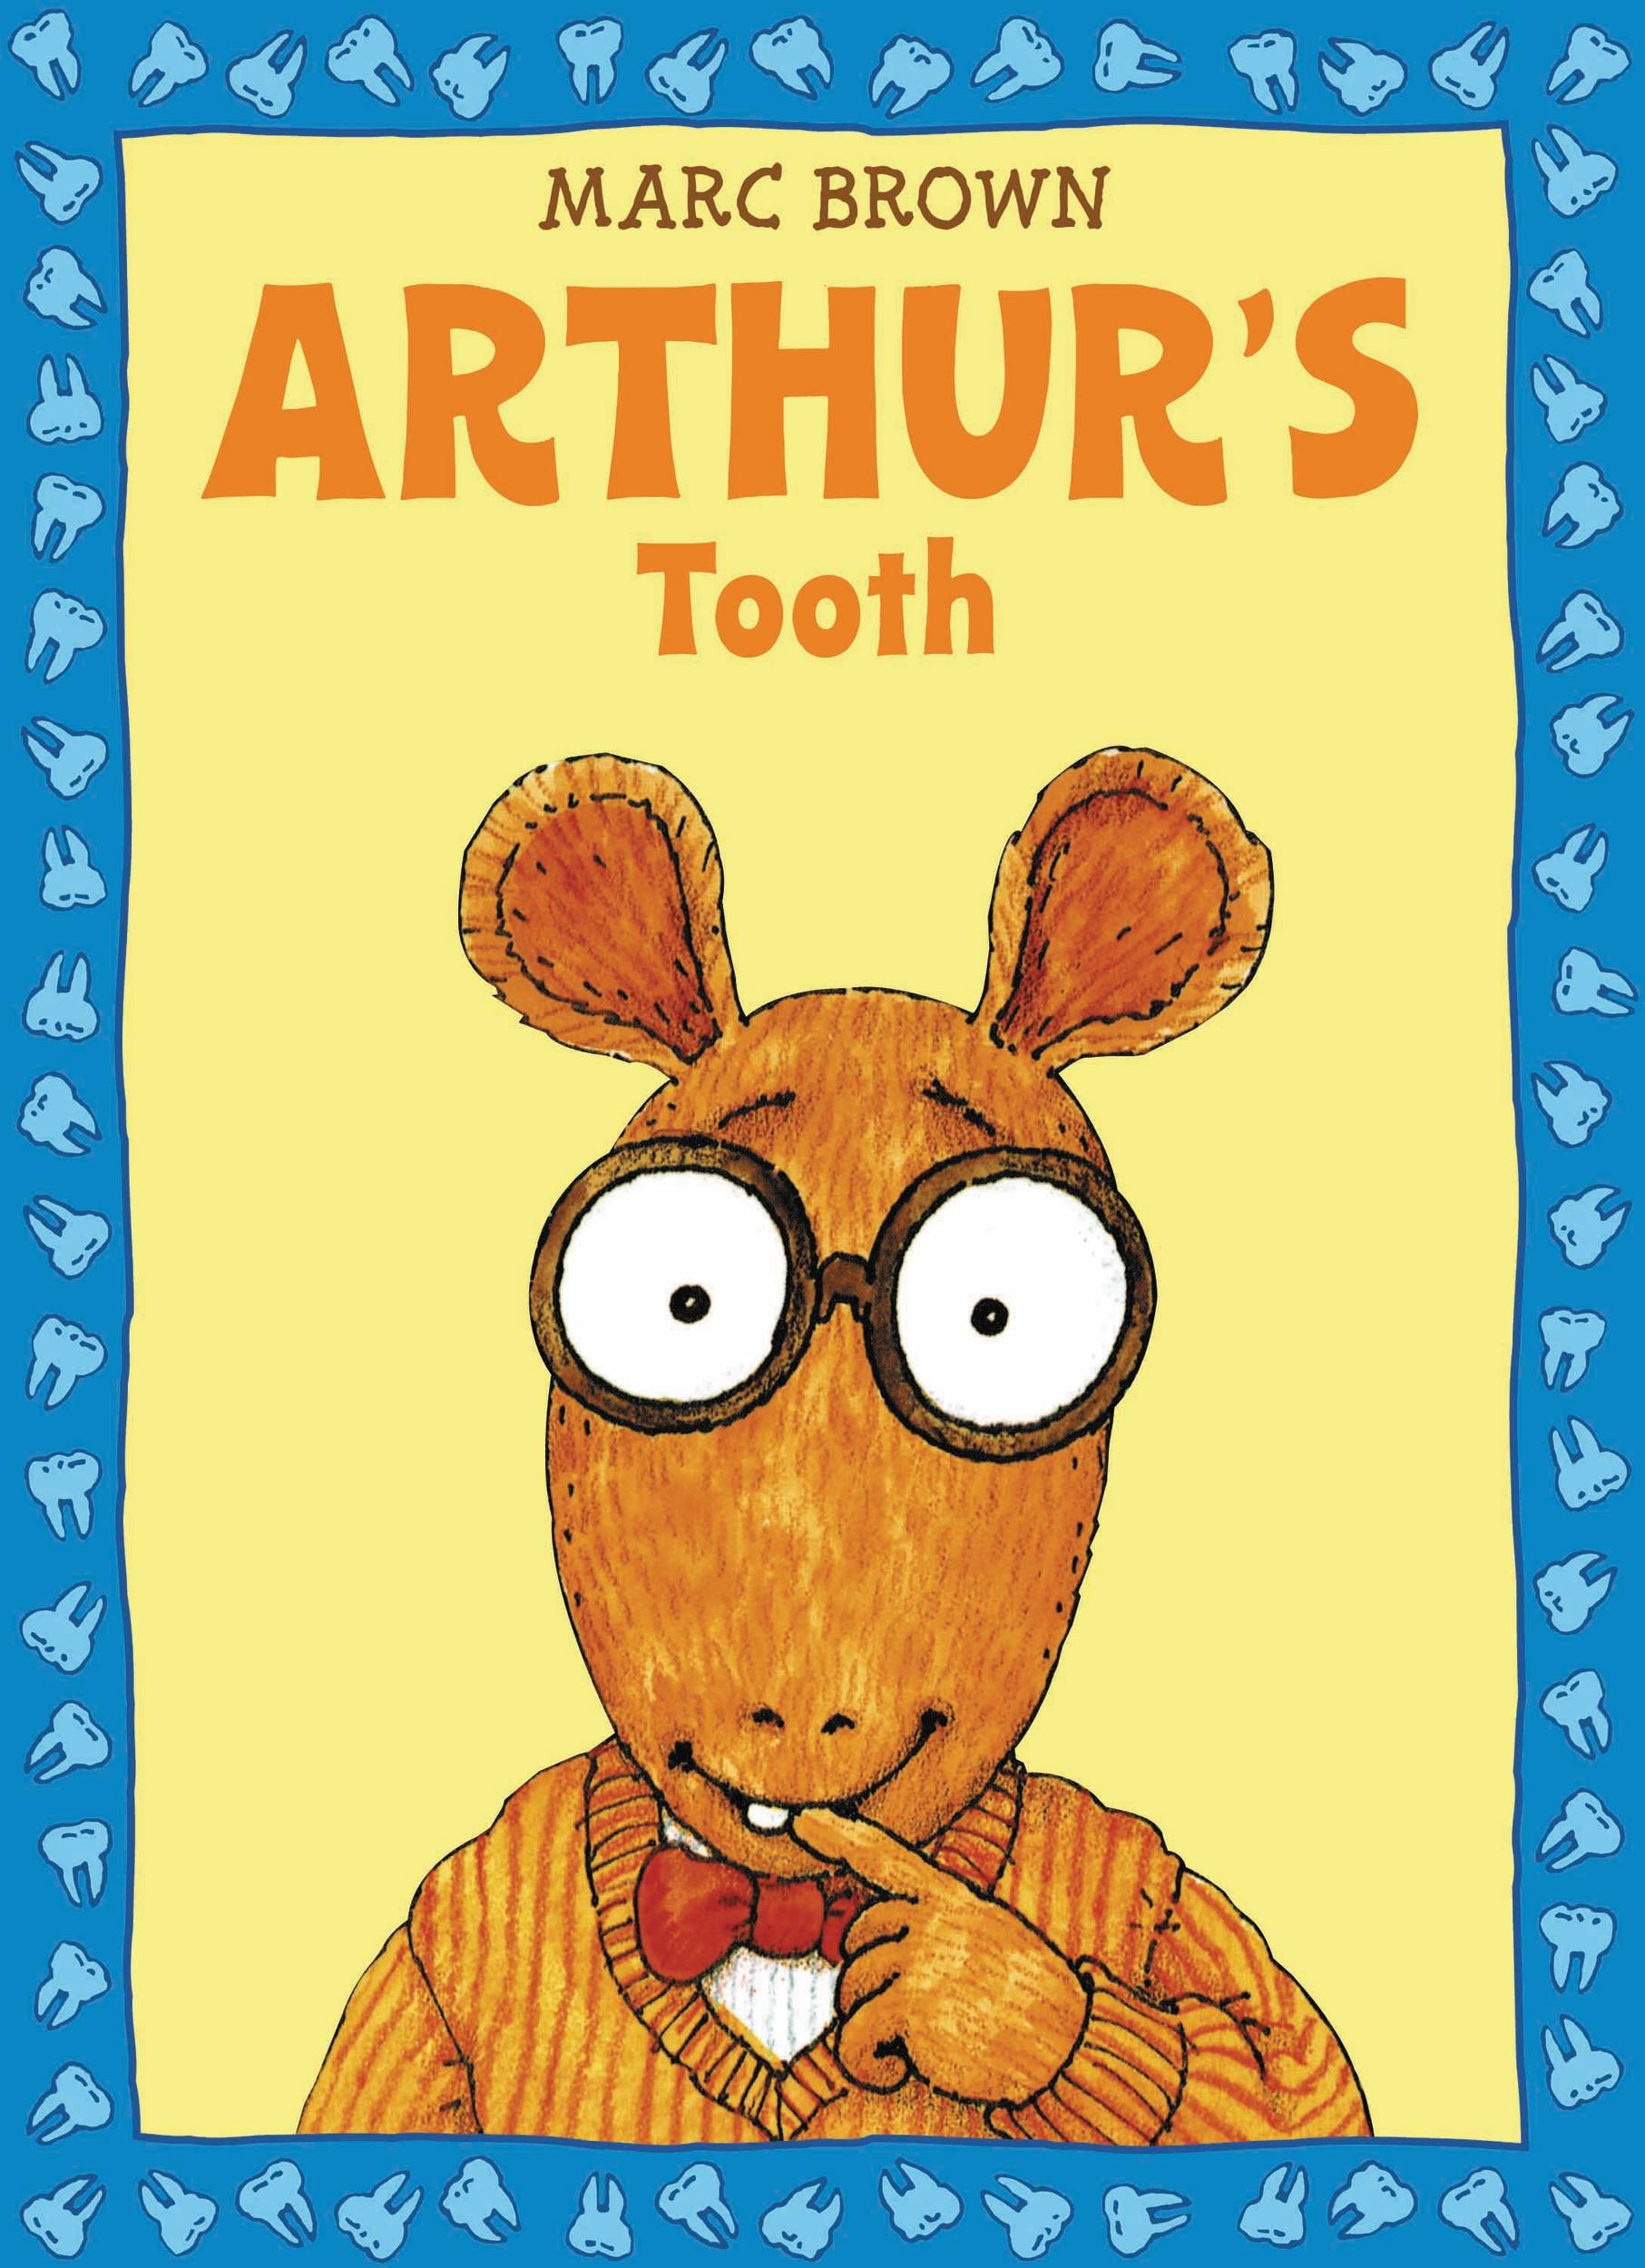 Arthur's Tooth (A Story from Arthur's Audio Favorites, Volume 1) by